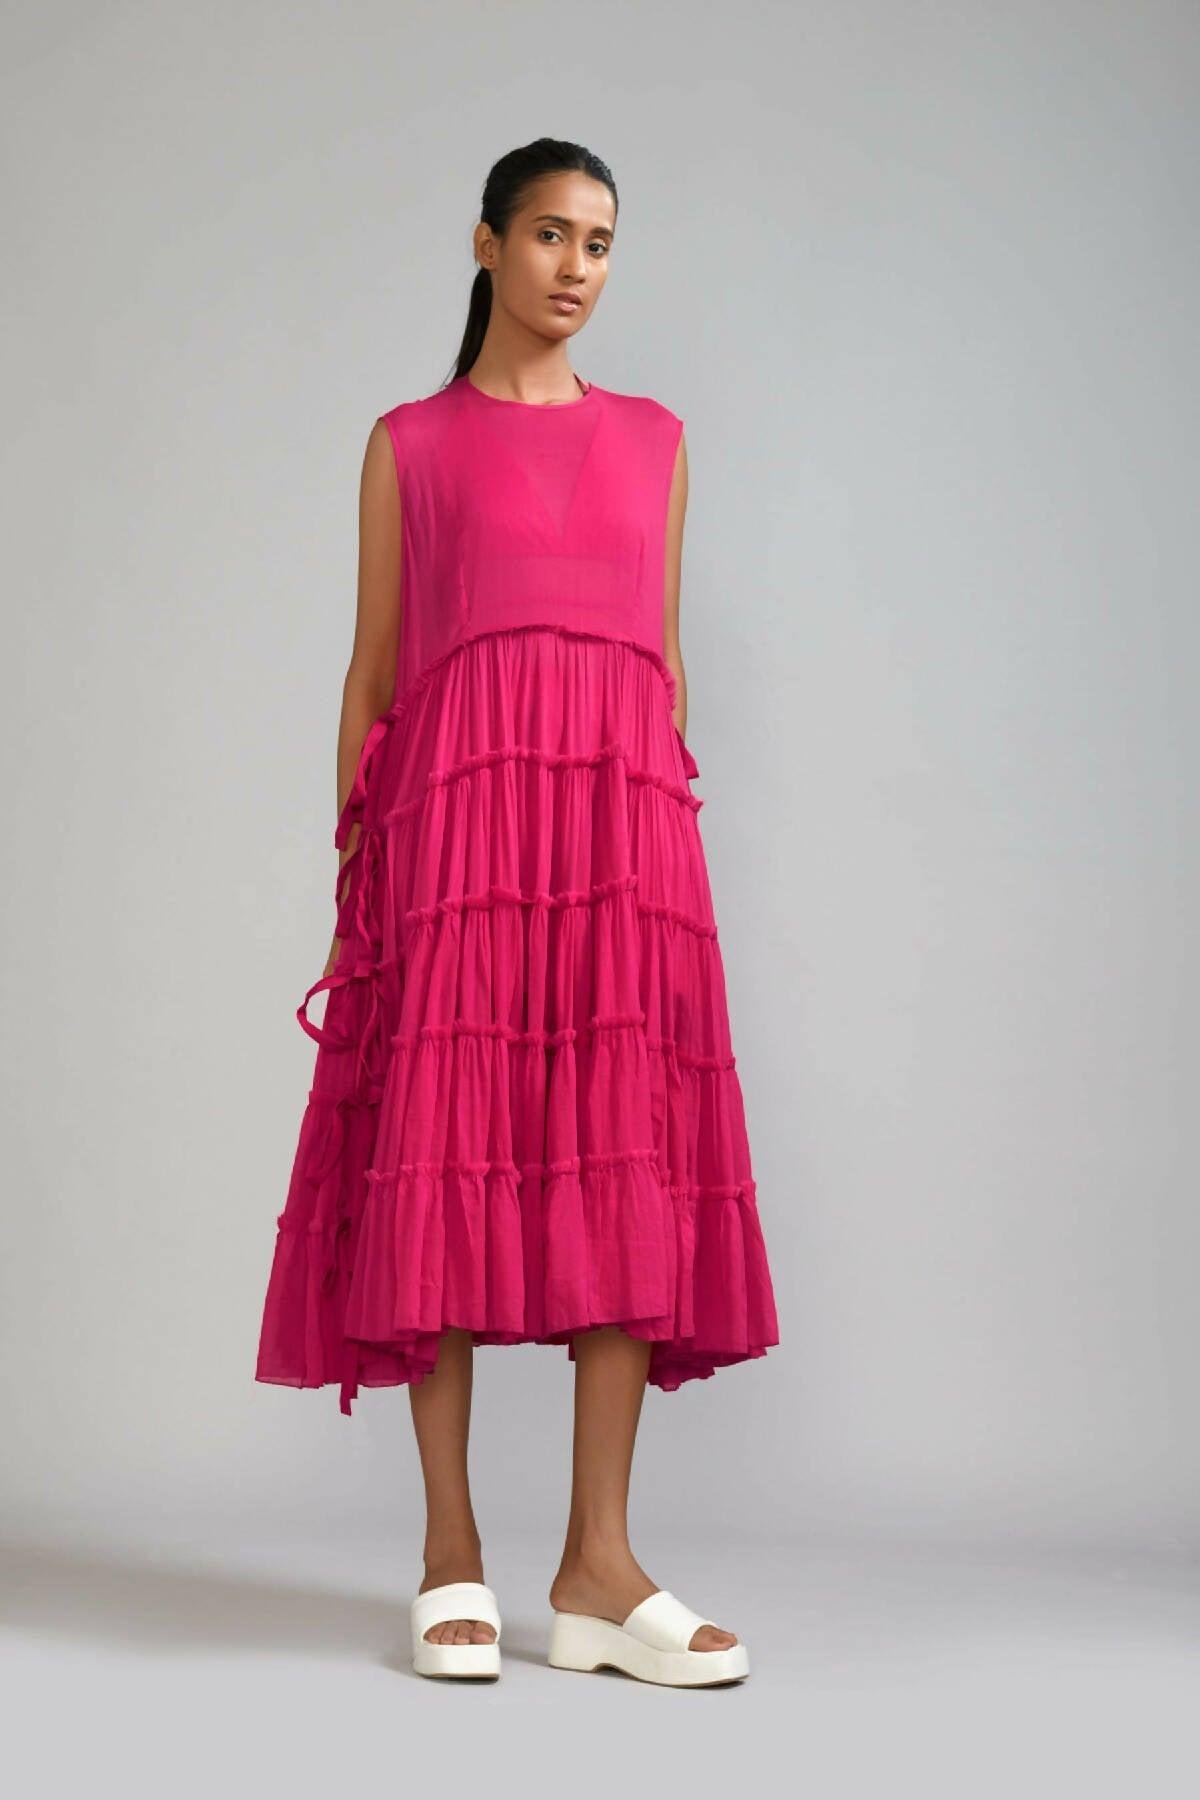 Pink Tiered Tie Tunic by MATI